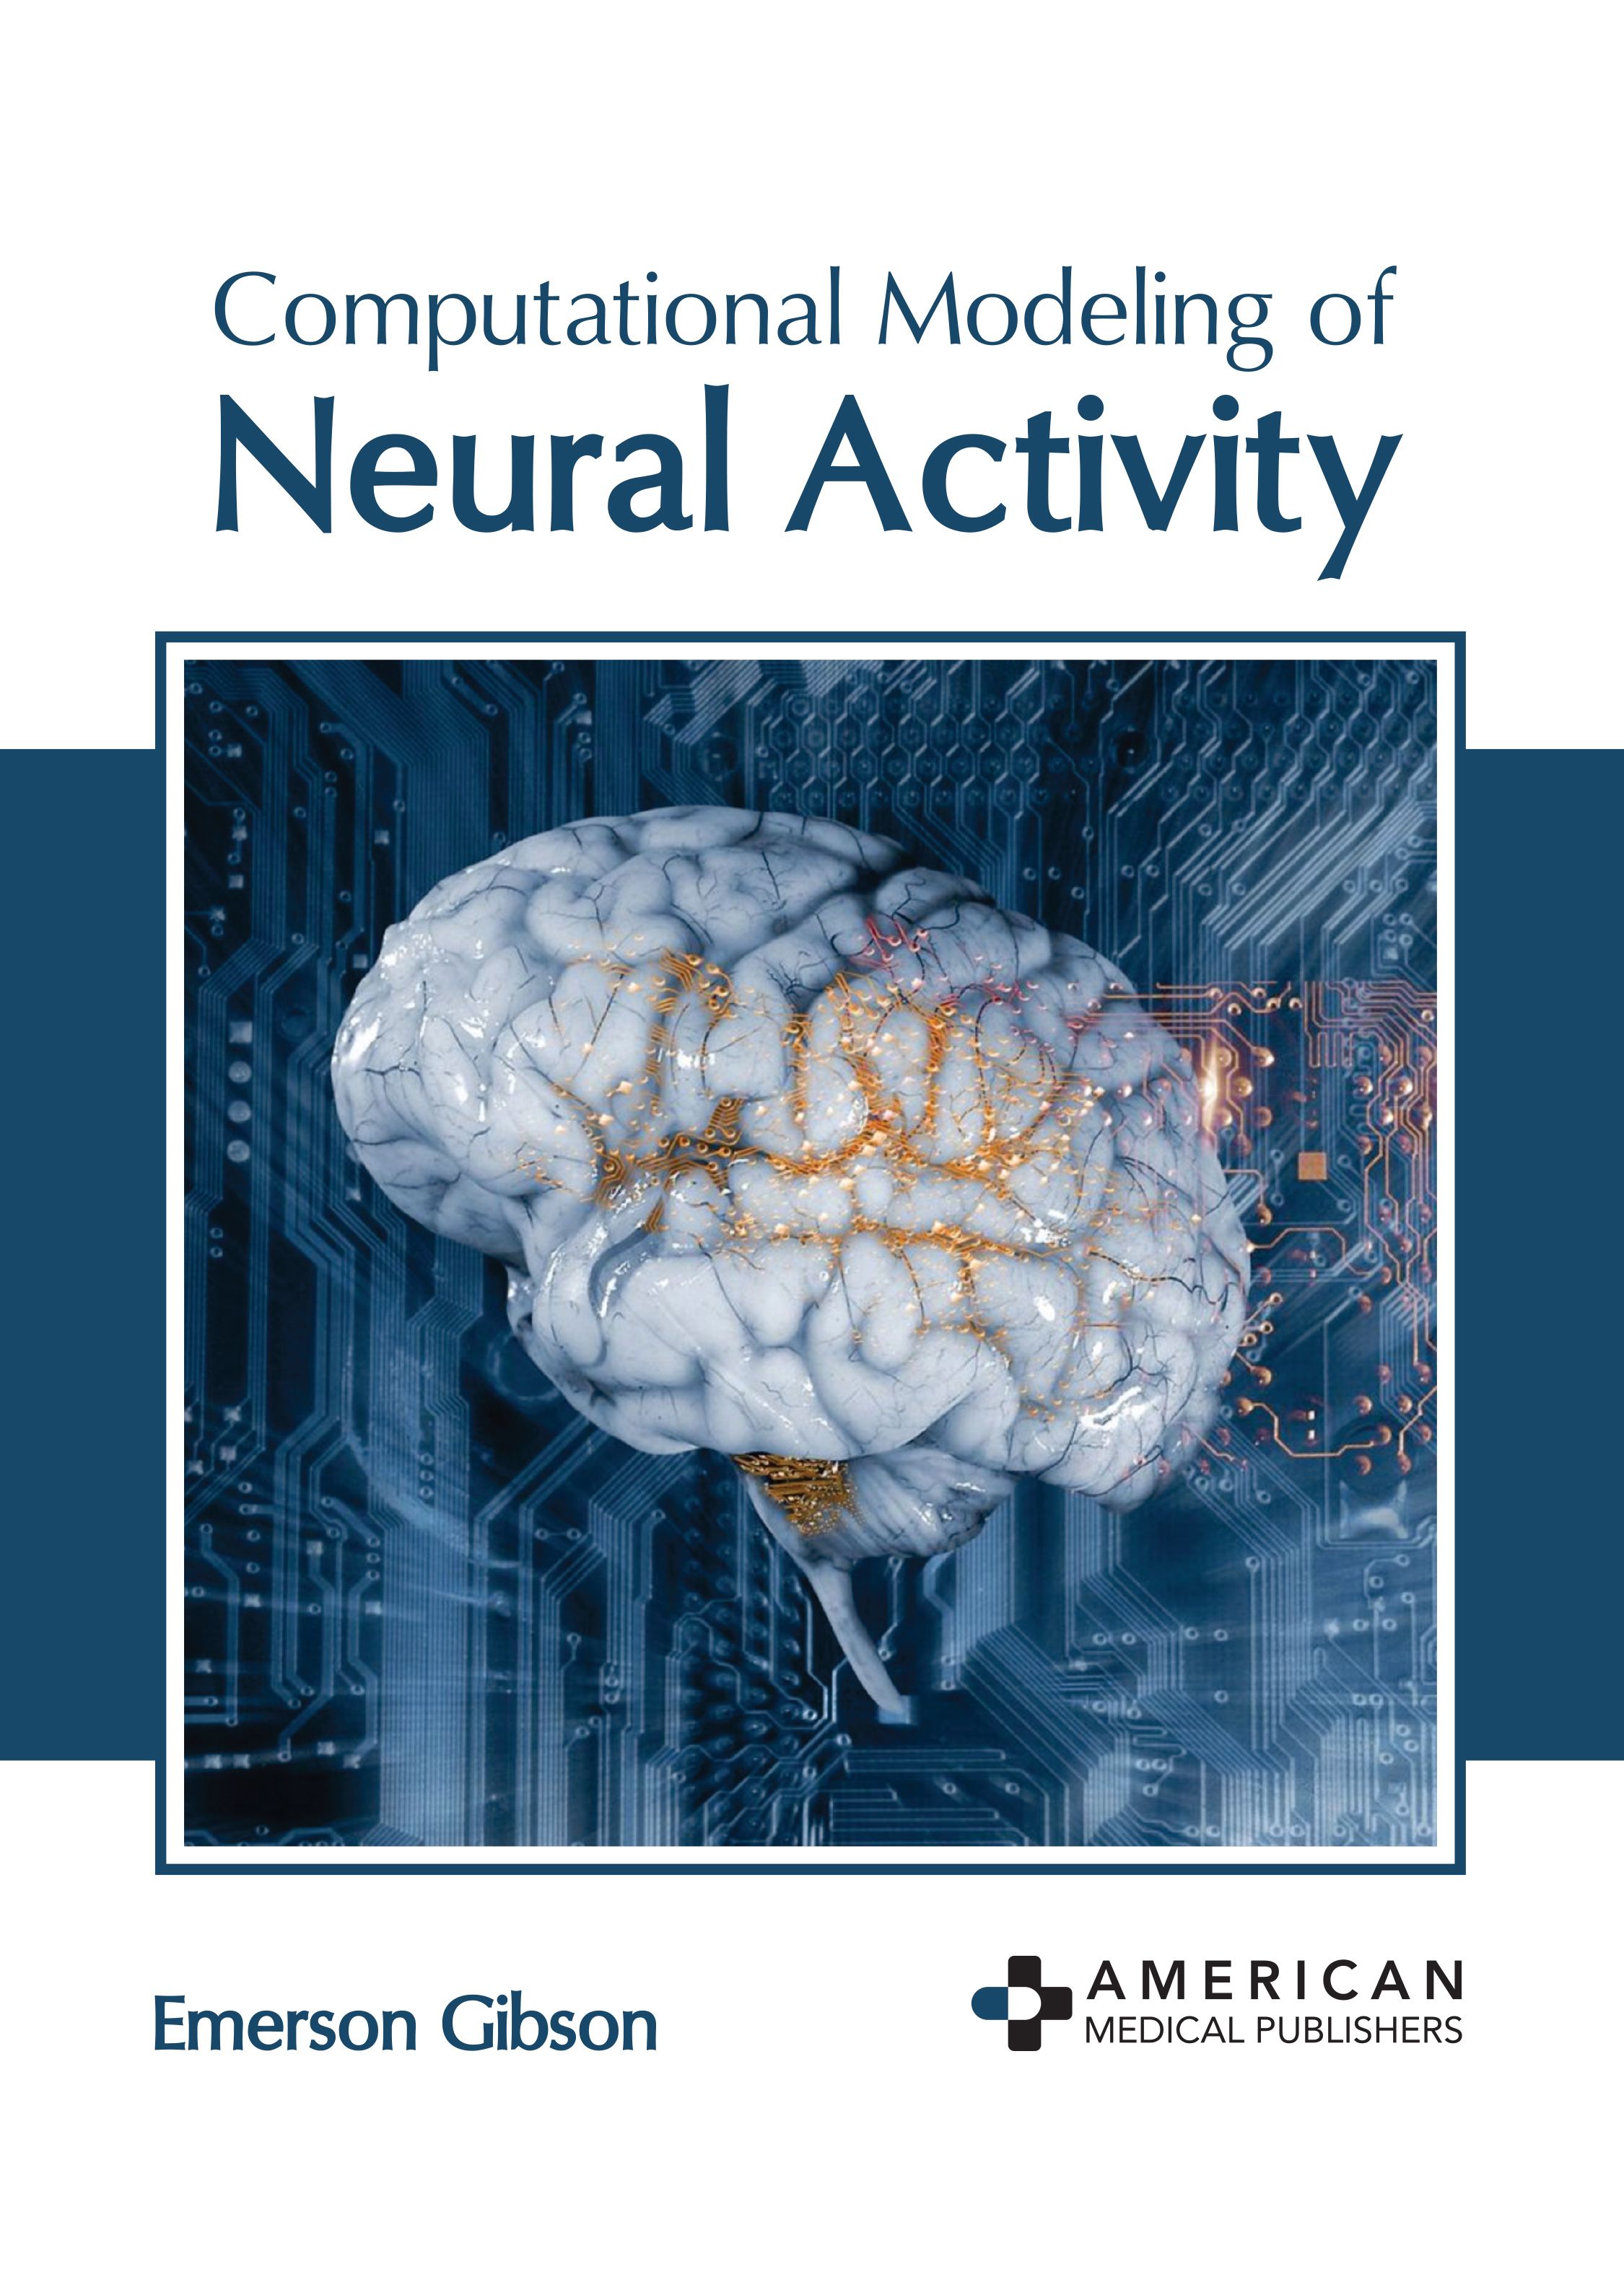 

exclusive-publishers/american-medical-publishers/computational-modeling-of-neural-activity-9798887400181